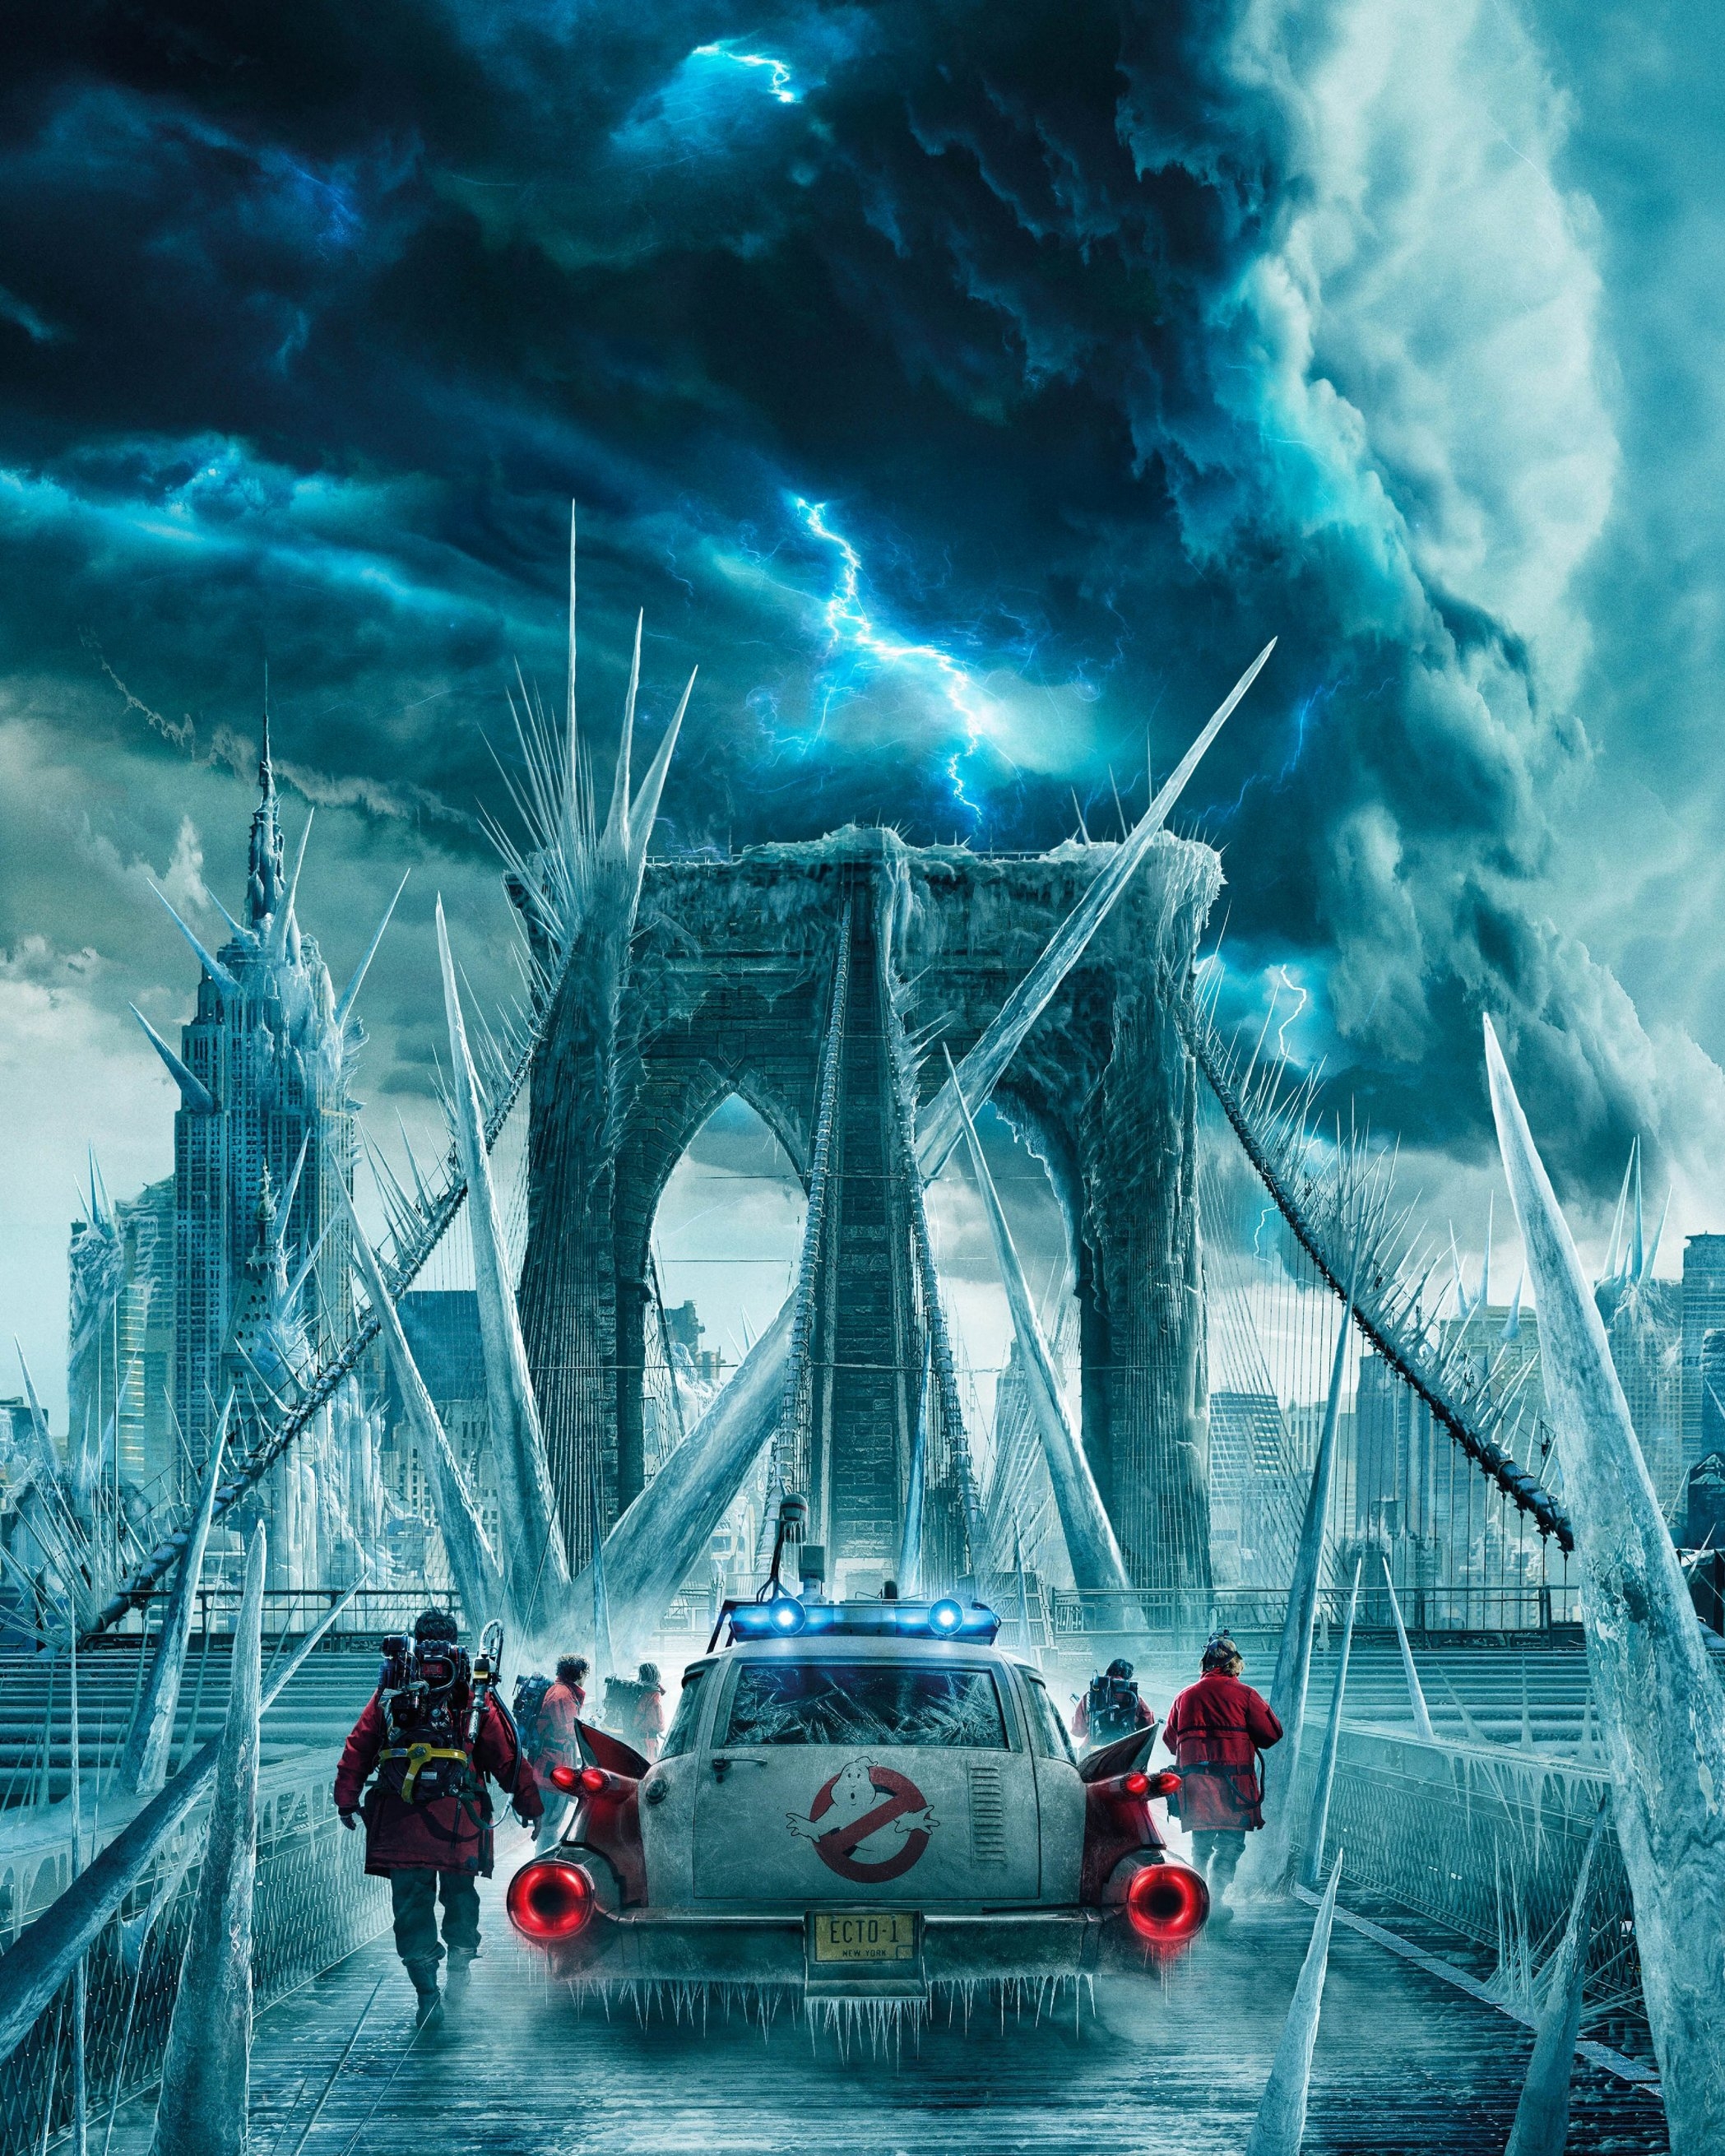 2200x2480 Resolution Movie Poster of Ghostbusters Frozen Empire ...